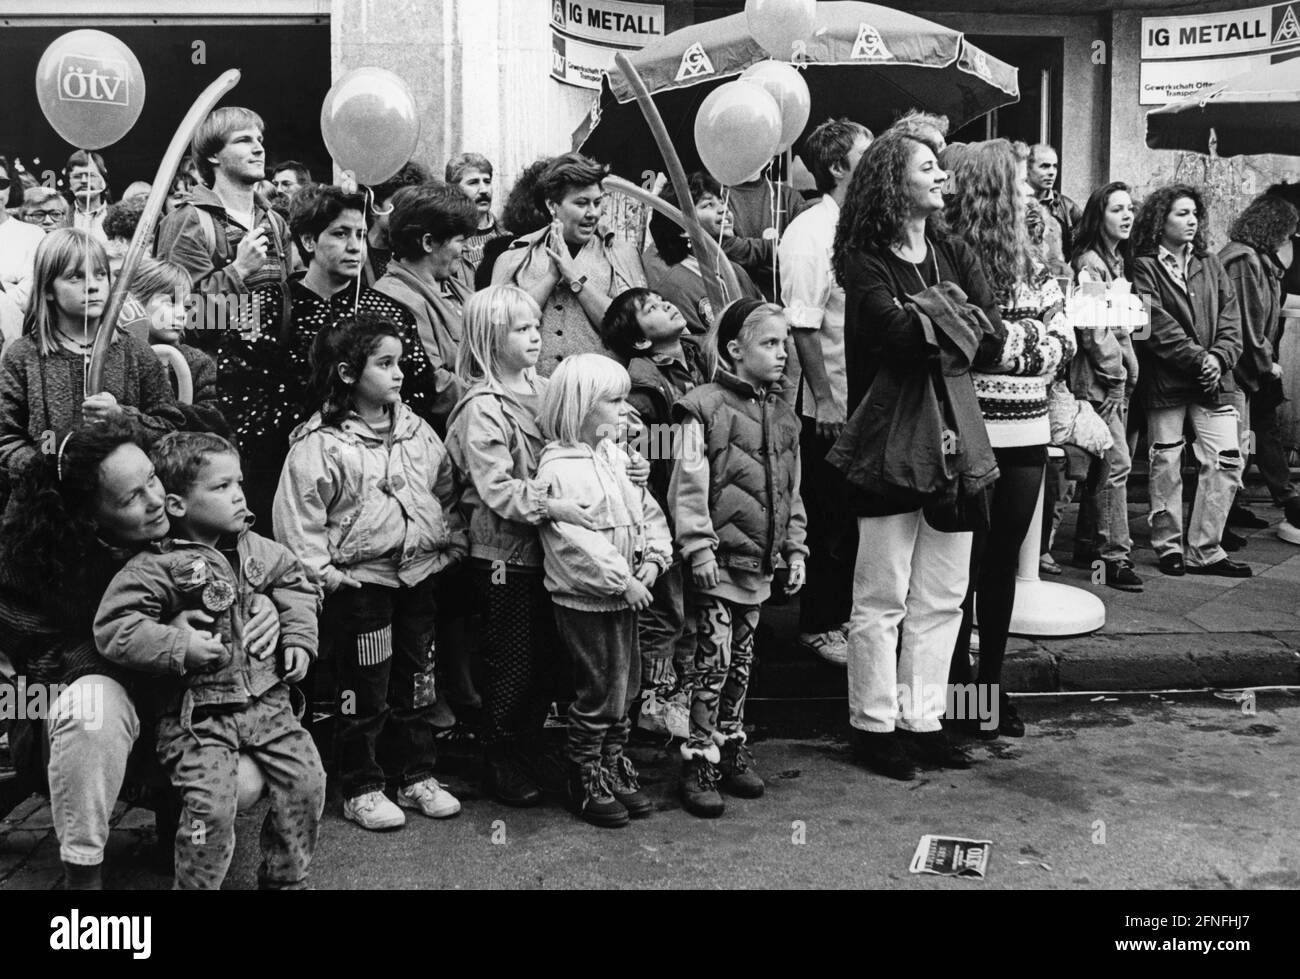 "Children and adults at the DGB's ""Multicultural Friendship Festival"" in front of Haus Metall in Pionierstraße. [automated translation]" Stock Photo